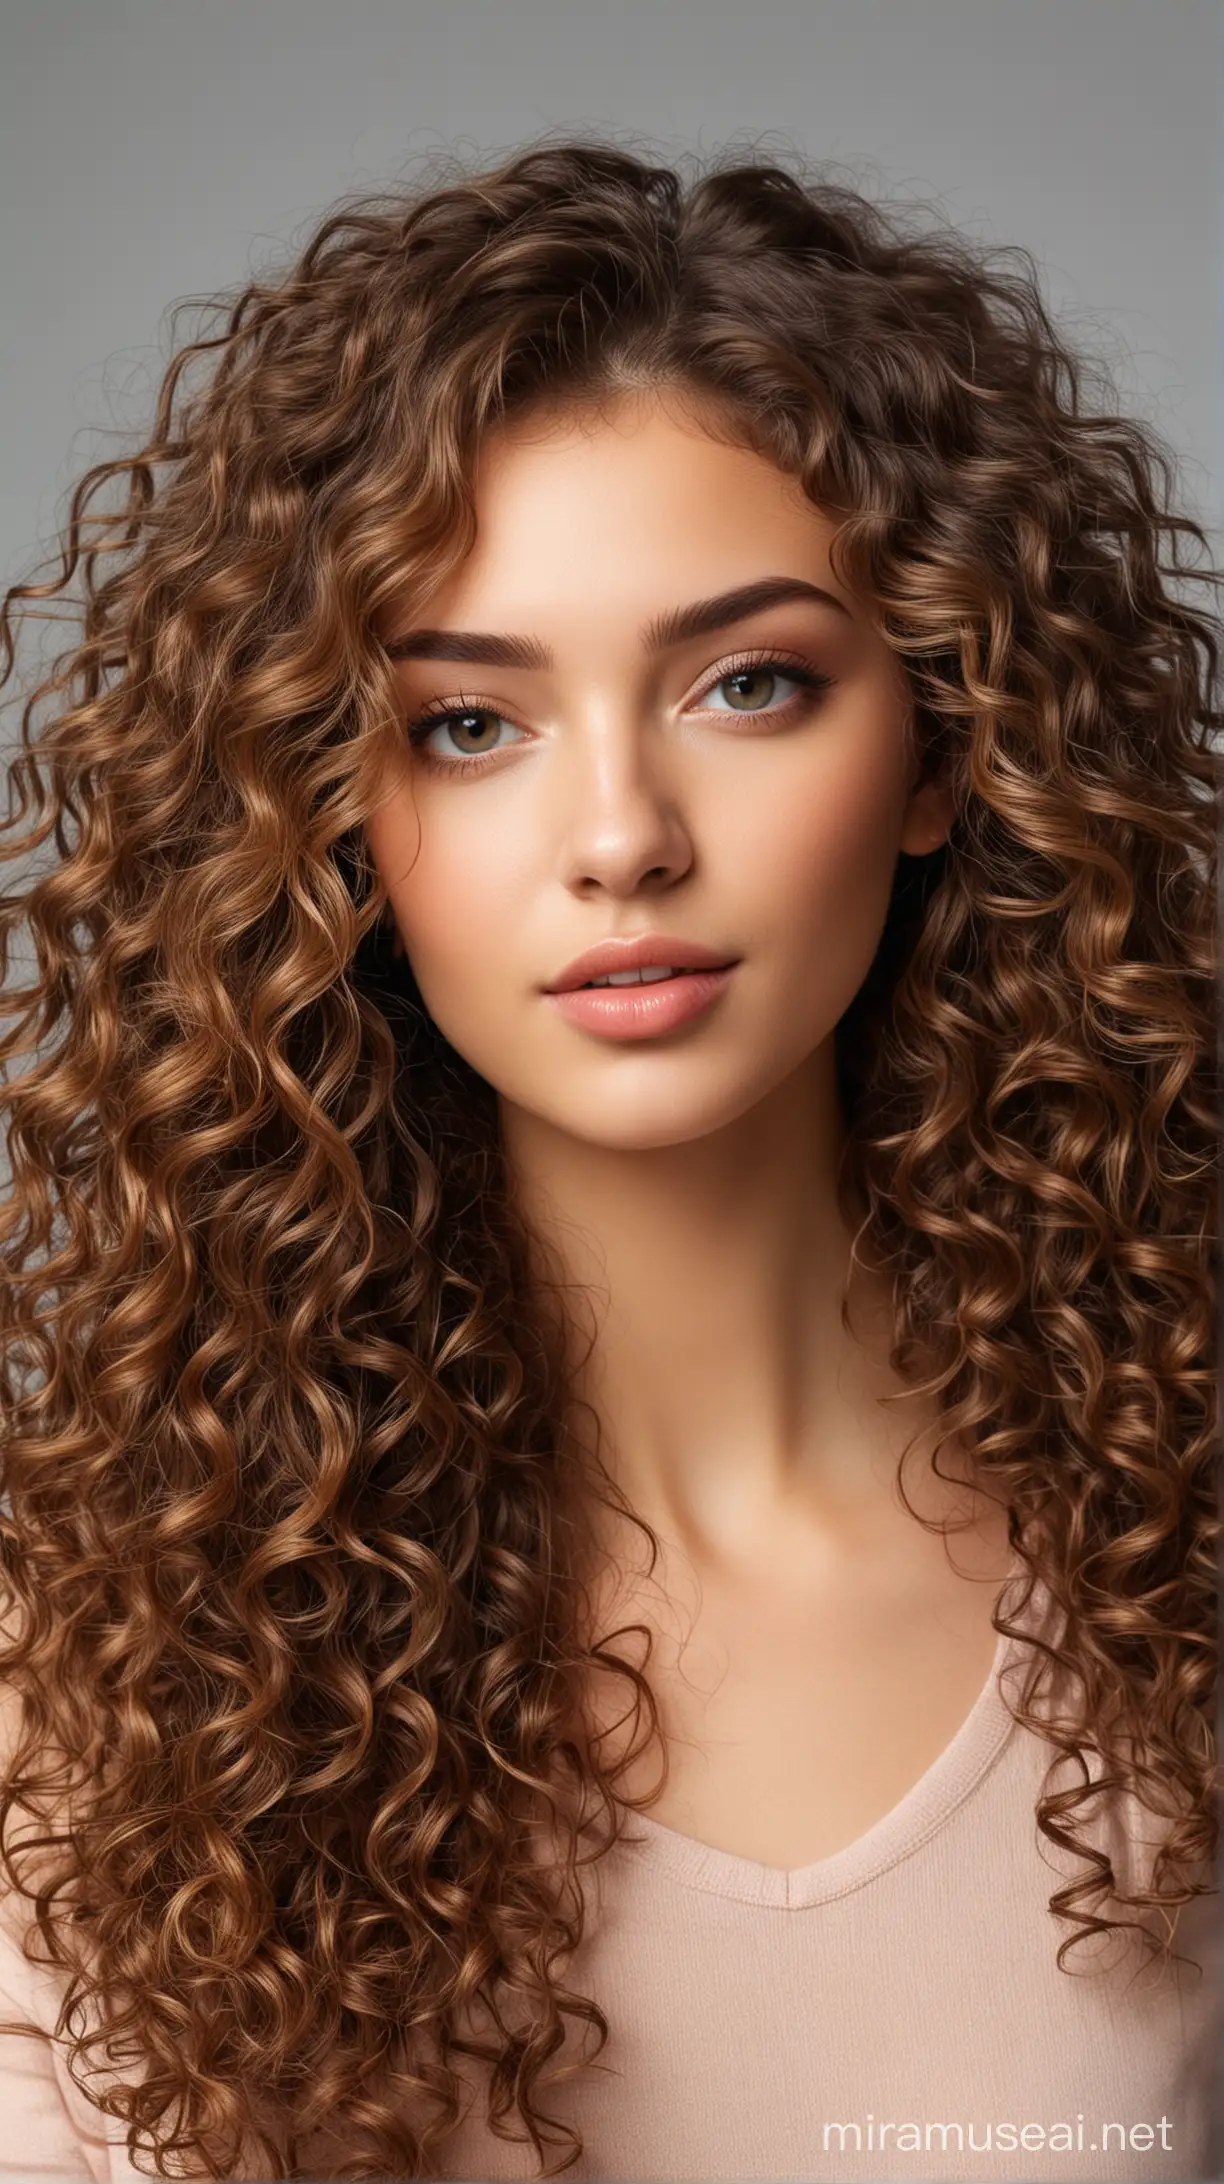 Spectacular model with beautiful and healthy curly hair